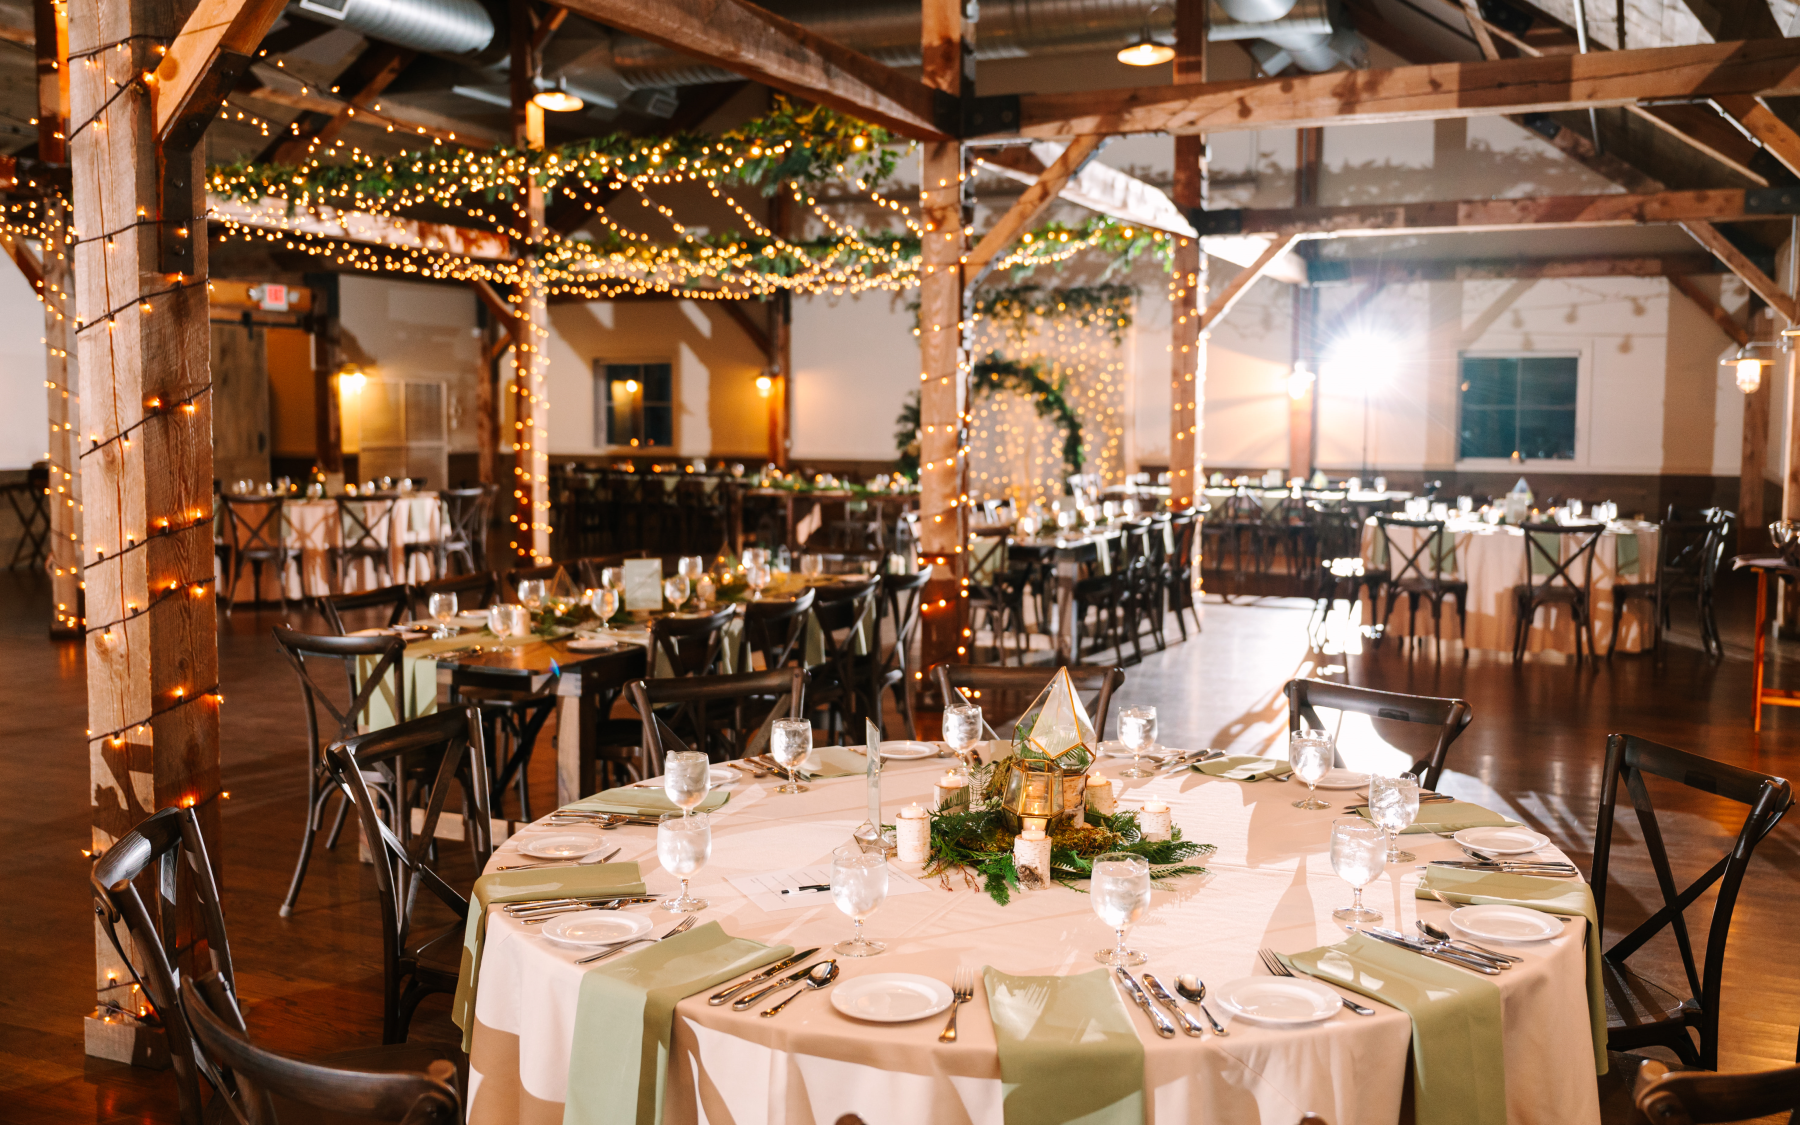 event barn set up with rounds and farmhouse tables with green napkins and greenery hanging from lights.